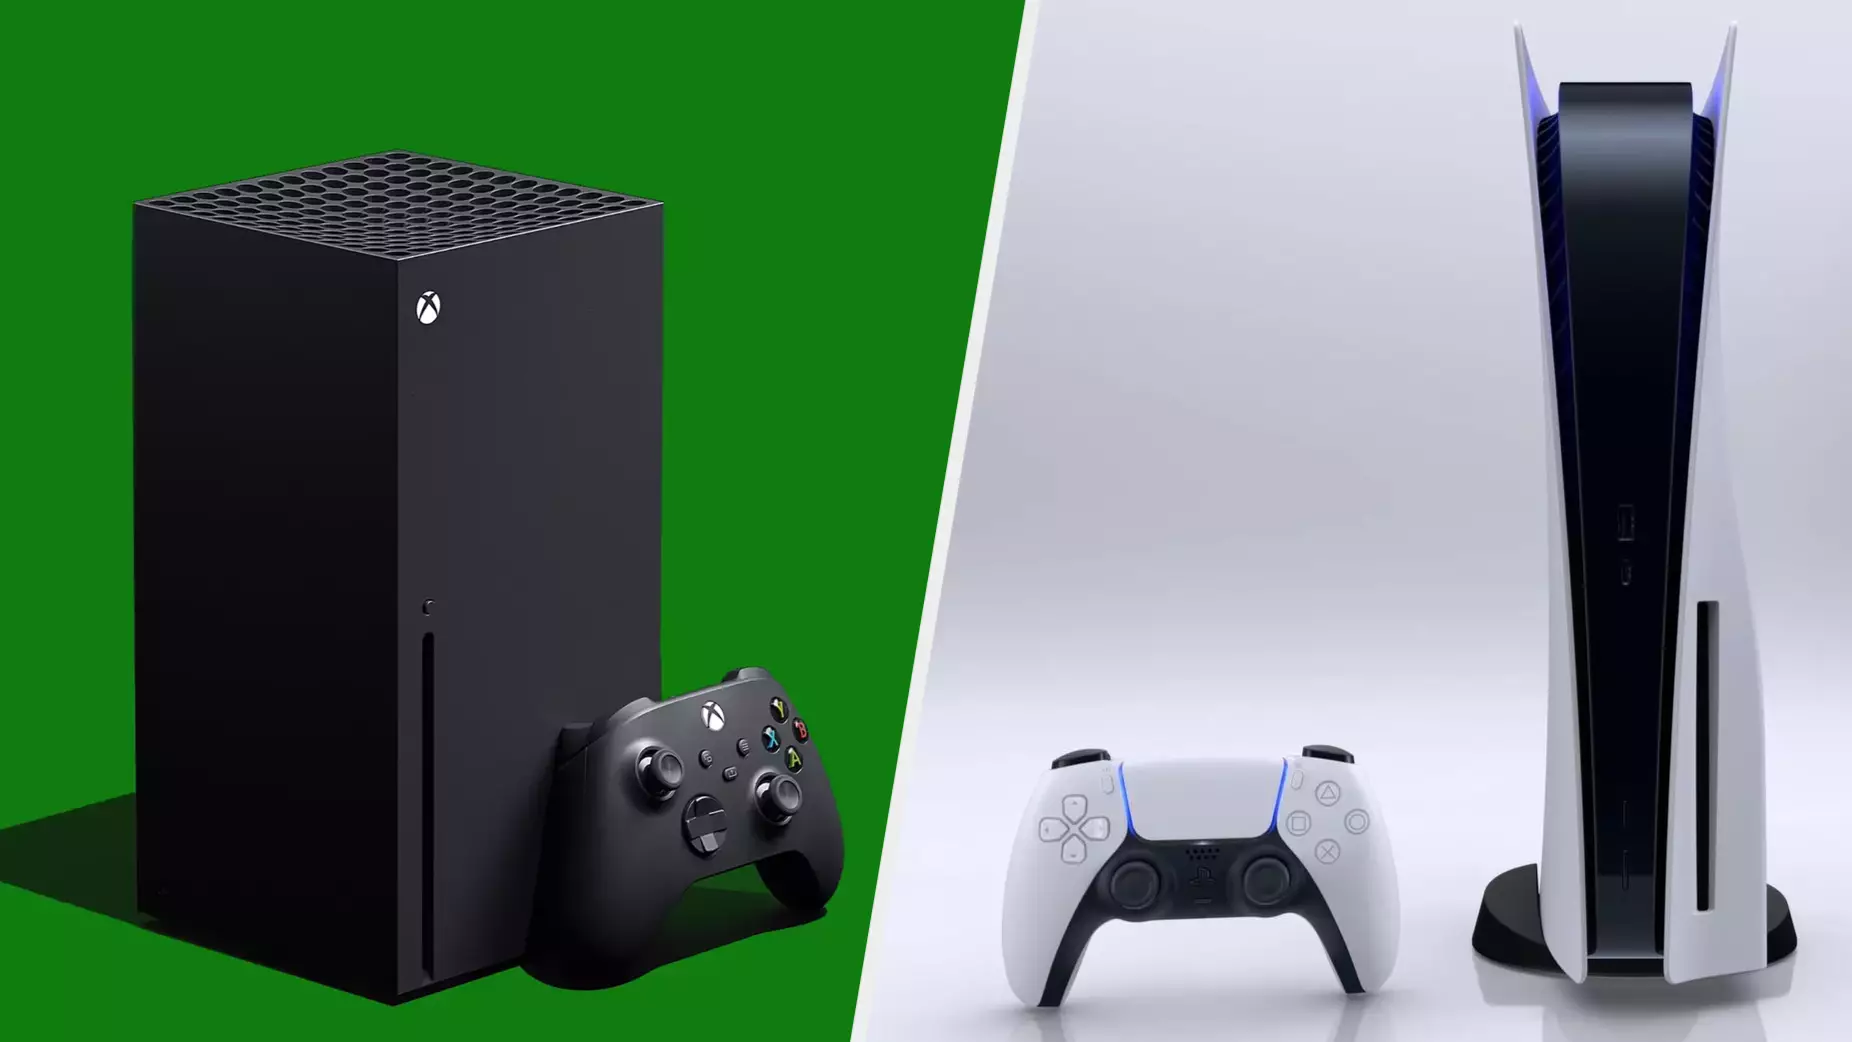 New Study Shows Which Console Is Getting The Most Interest Before Christmas